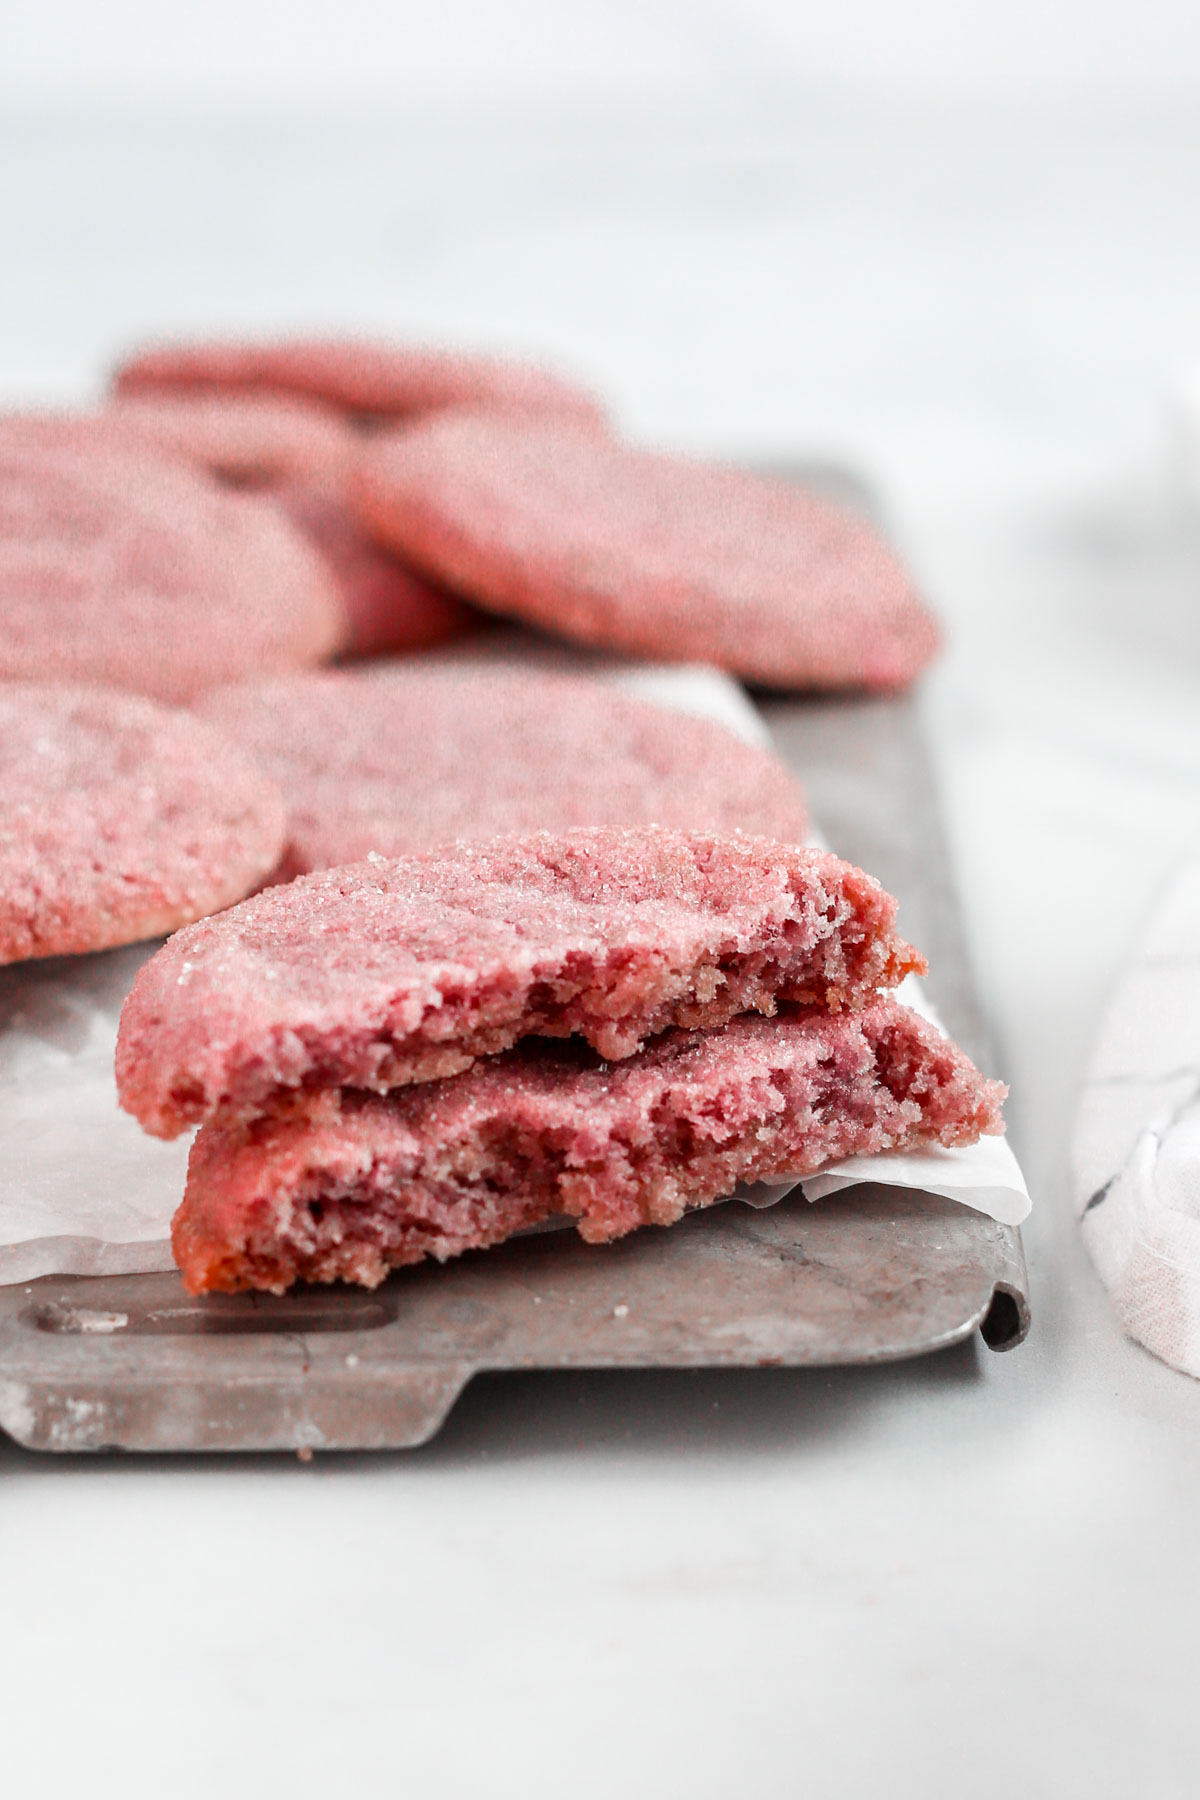 Two halves of pink cookies stacked on top of each other, showing the soft and chewy texture of the cookies.